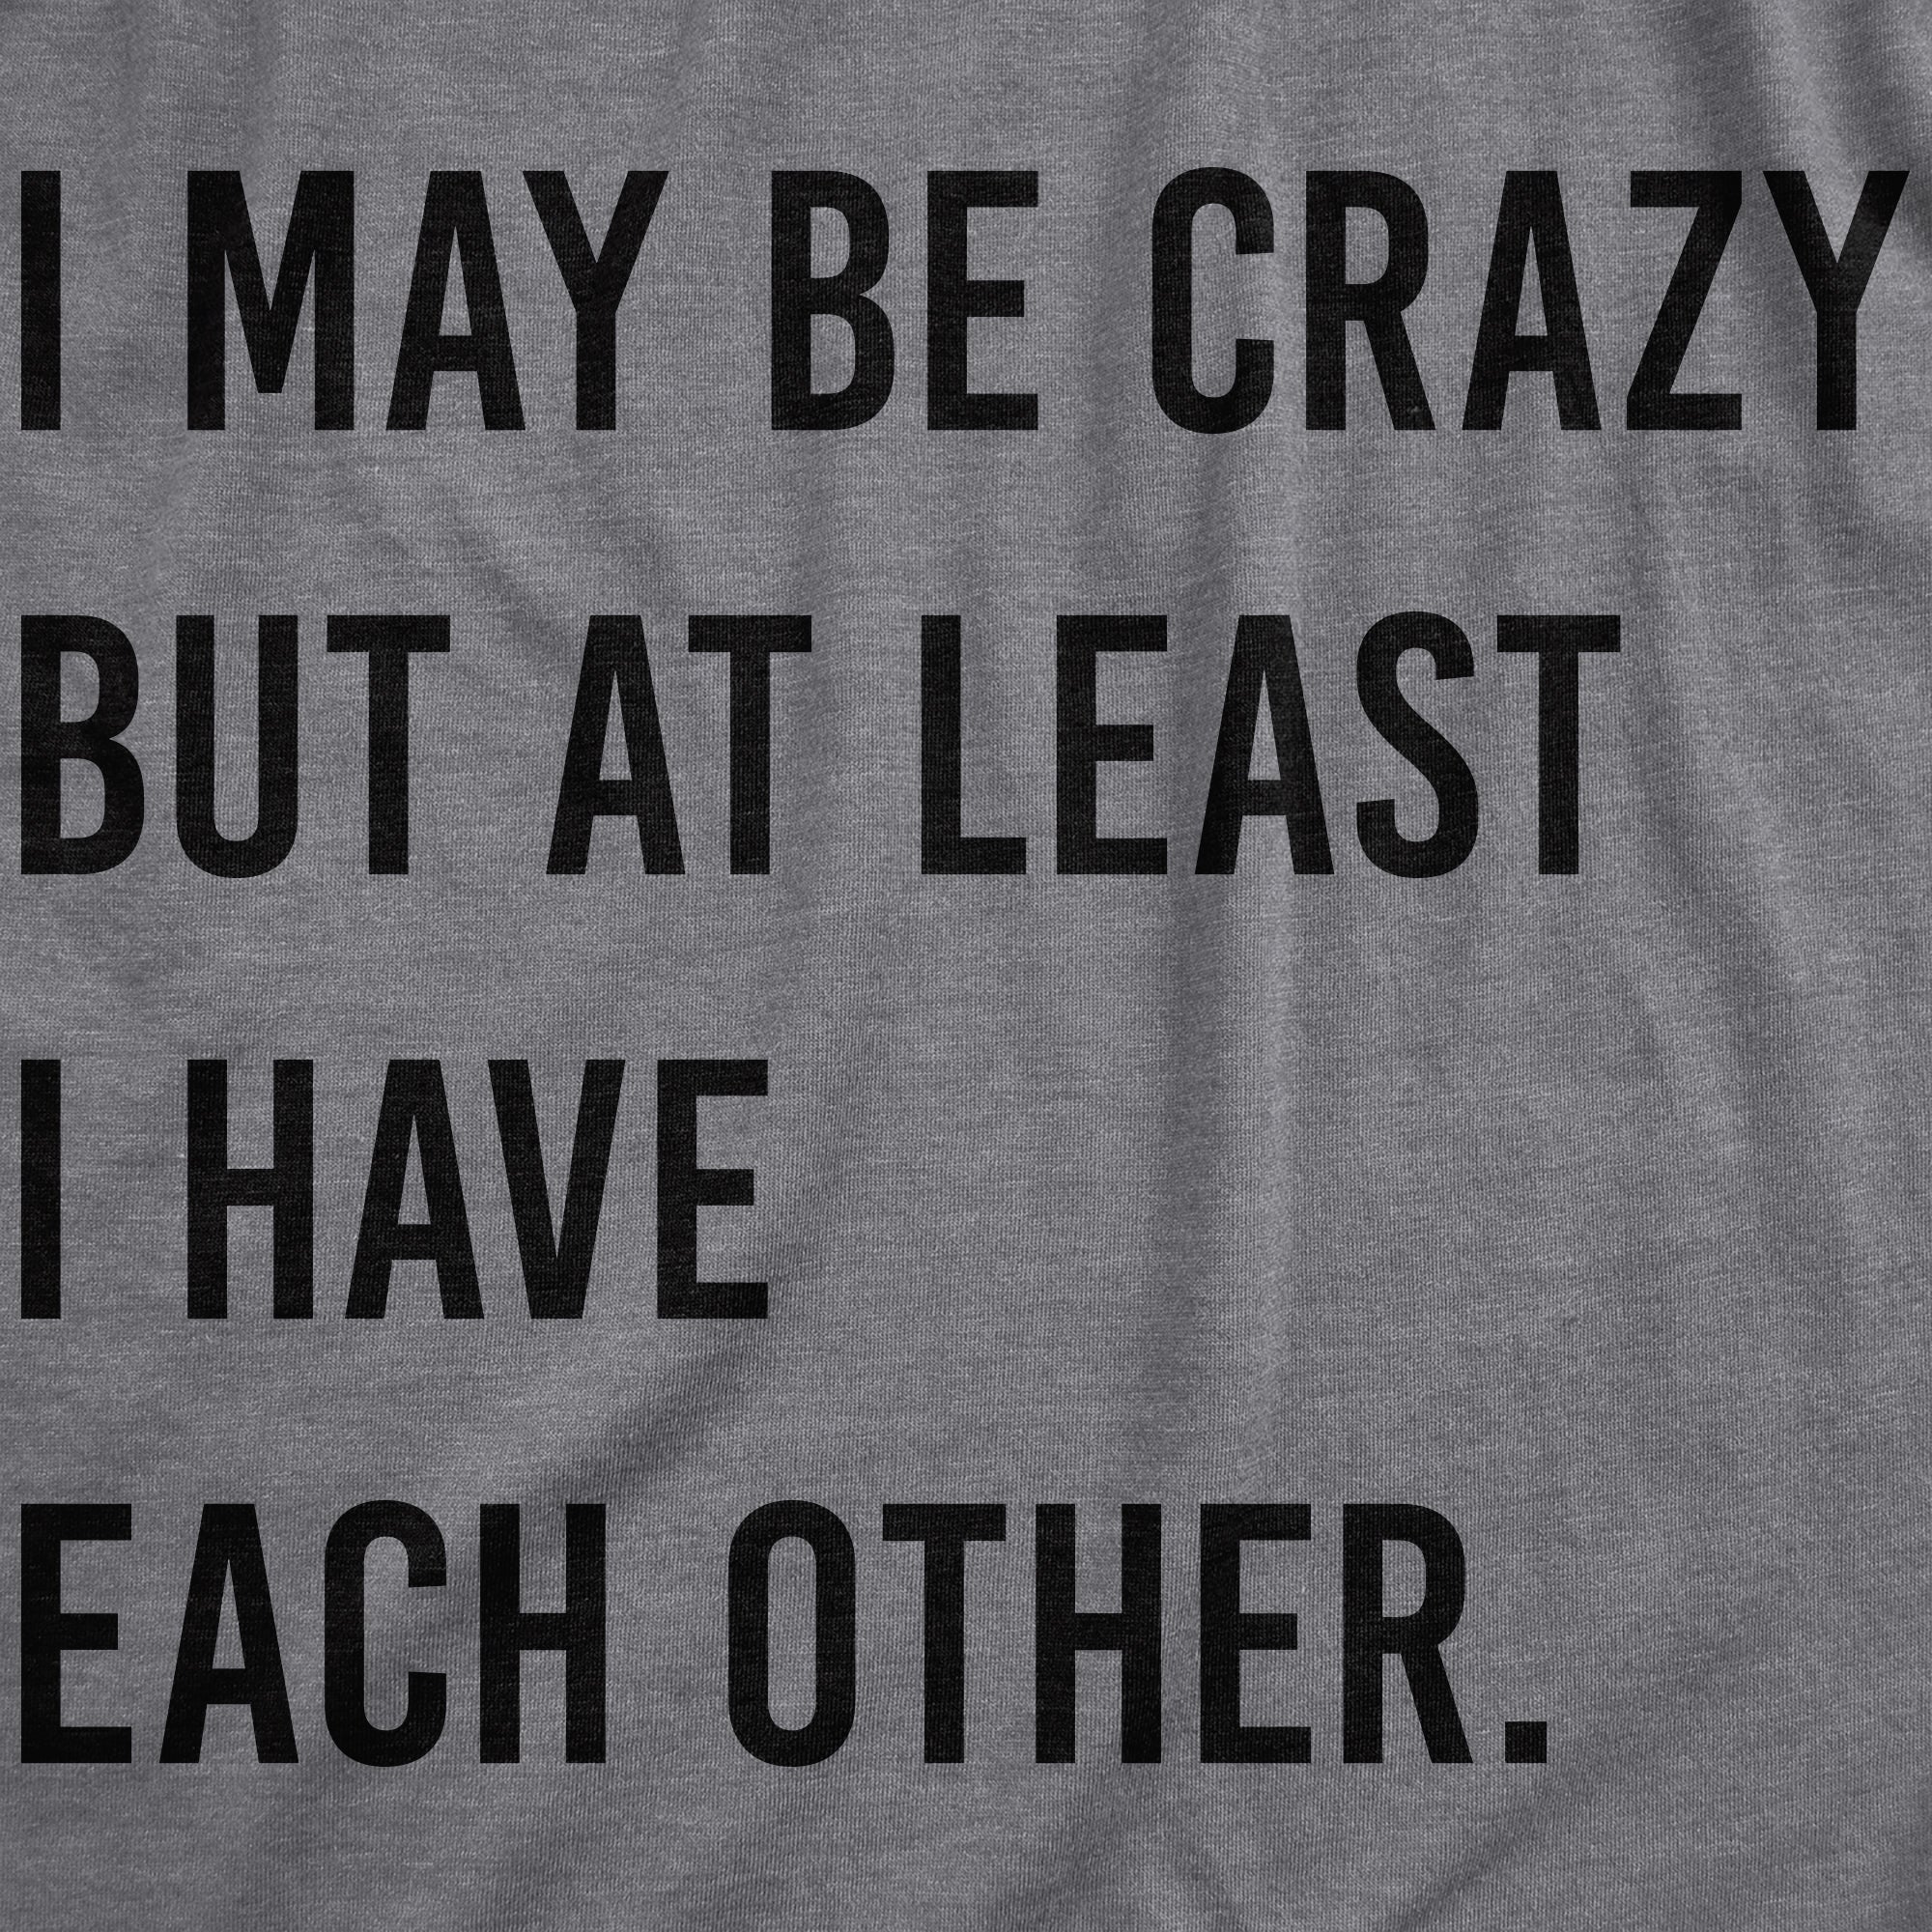 Funny Dark Heather Grey - CRAZY I May Be Crazy But At Least I Have Each Other Mens T Shirt Nerdy Sarcastic Tee